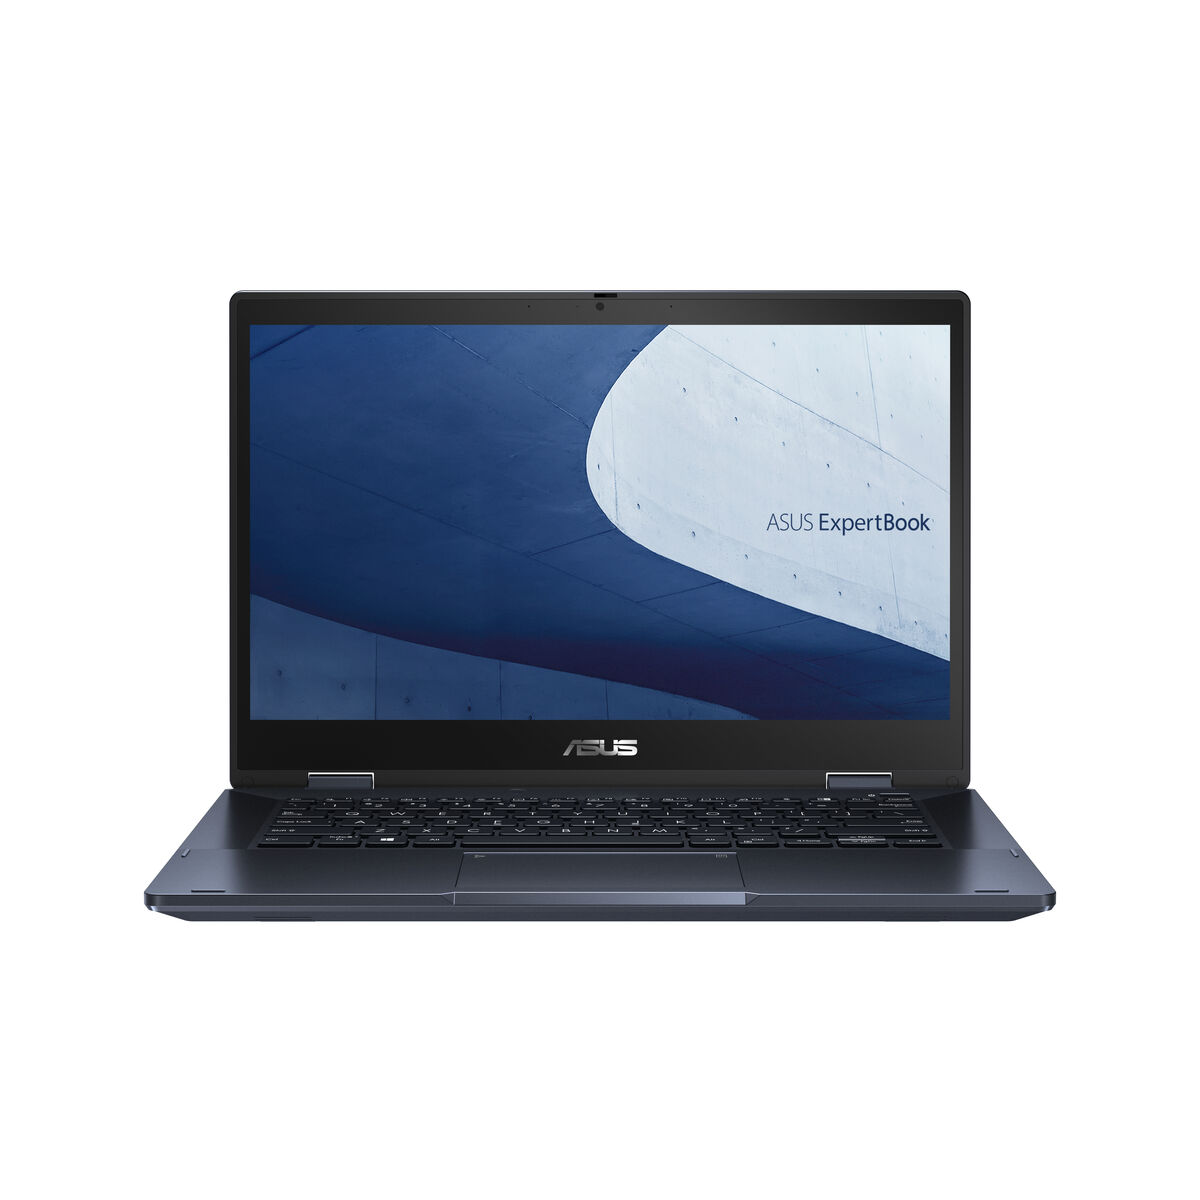 Laptop Asus 90NX04S1-M00FS0 14" Intel Core i5-1235U 8 GB RAM 256 GB SSD Qwerty in Spagnolo